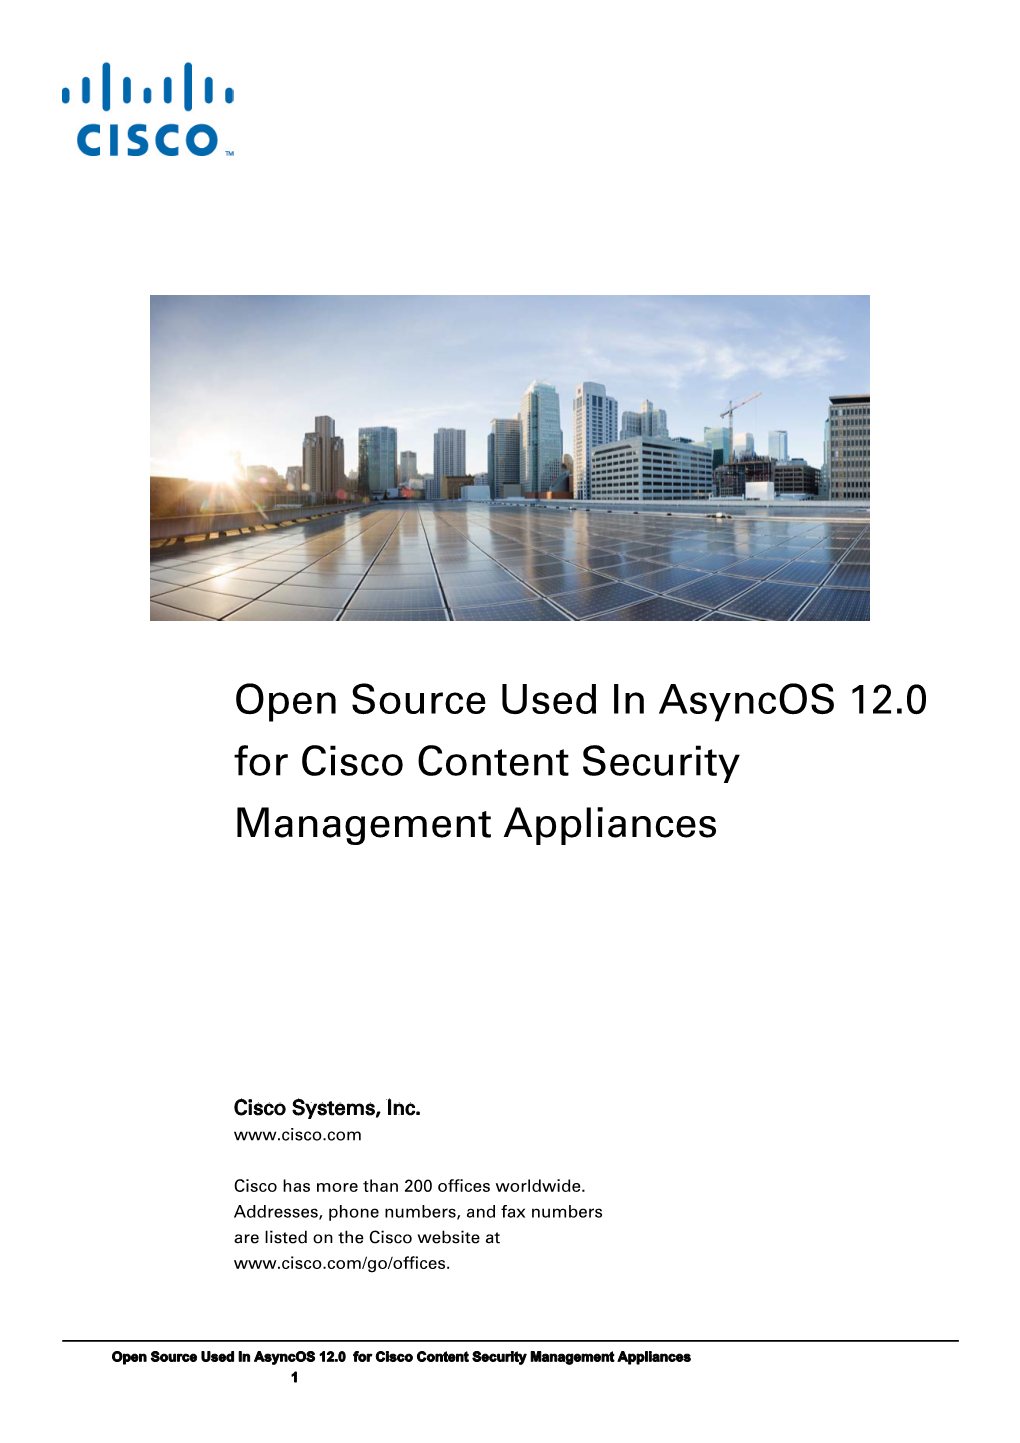 Open Source Used in Asyncos 12.0 for Cisco Content Security Management Appliances